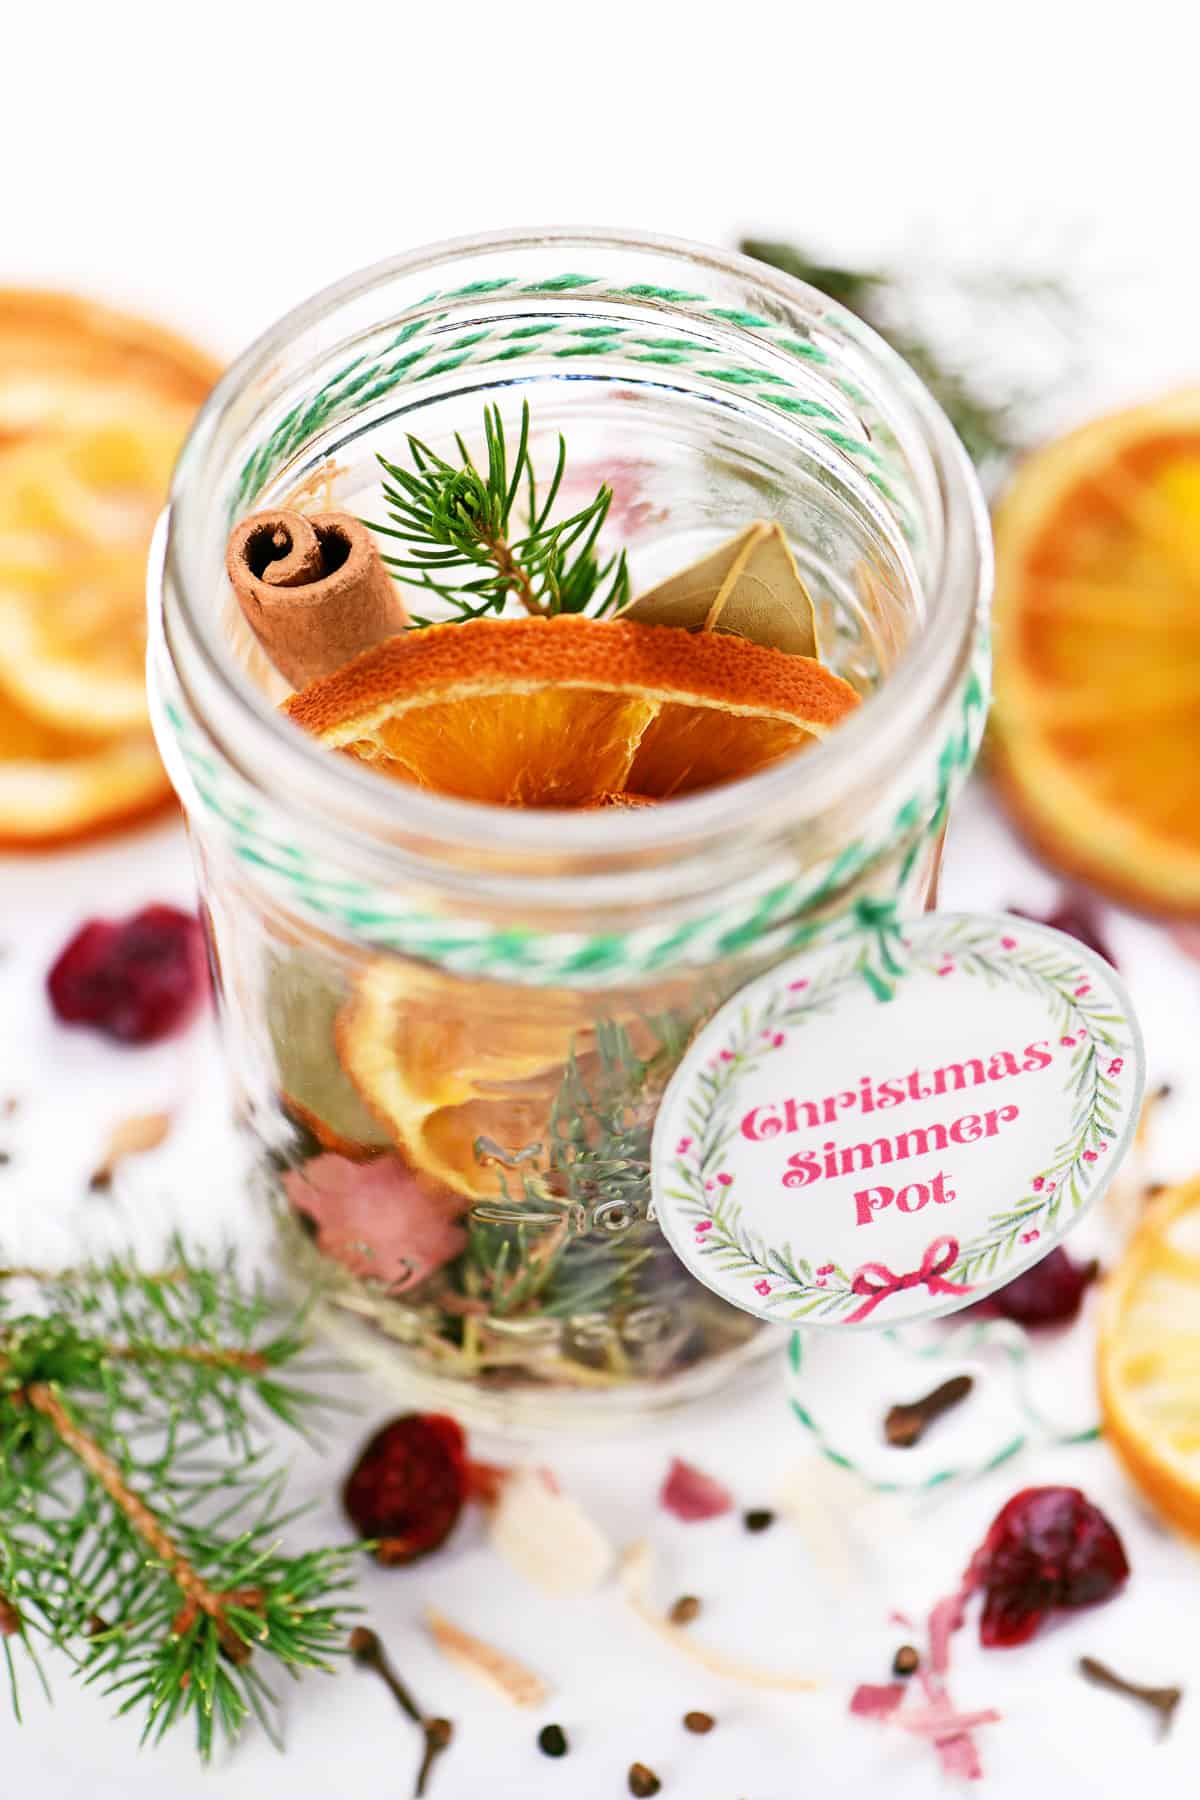 Christmas simmering pot mix in a jar.